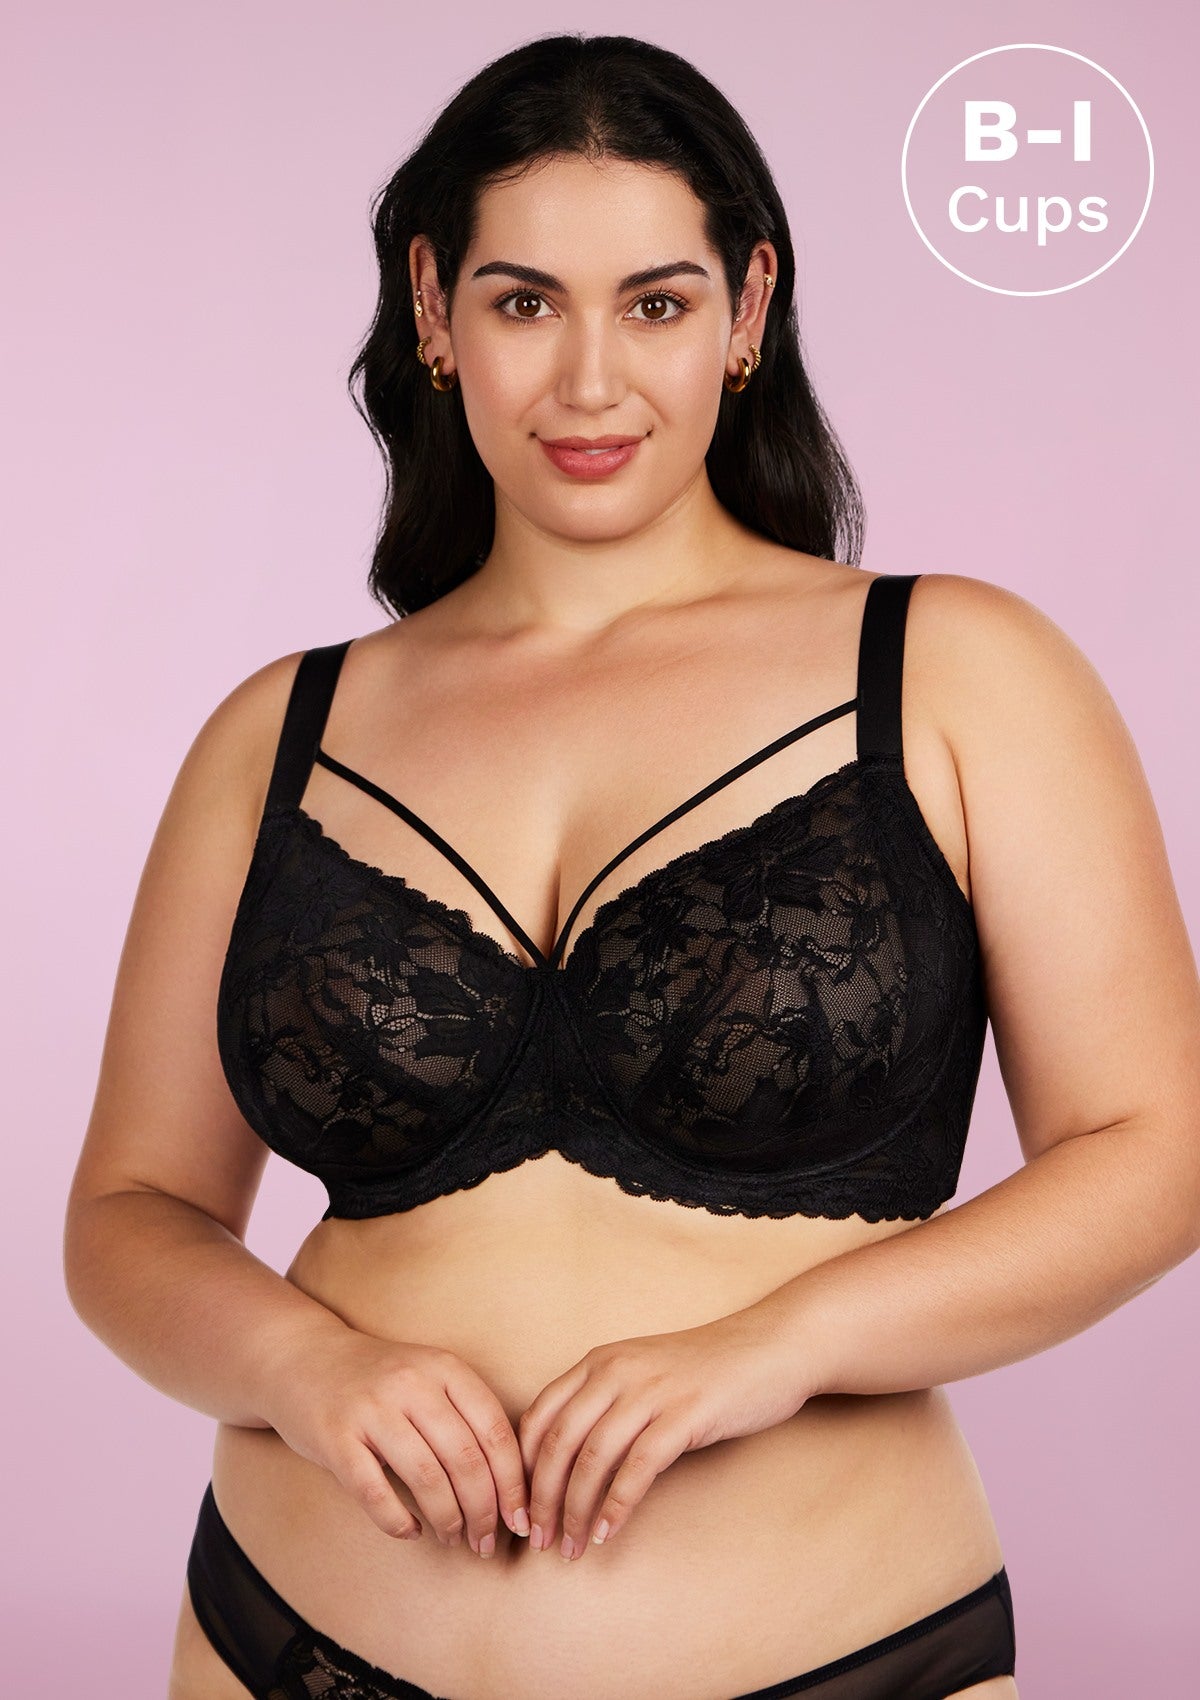 HSIA Pretty In Petals Lace Bra And Panty Set: Non Padded Wired Bra - Black / 40 / D